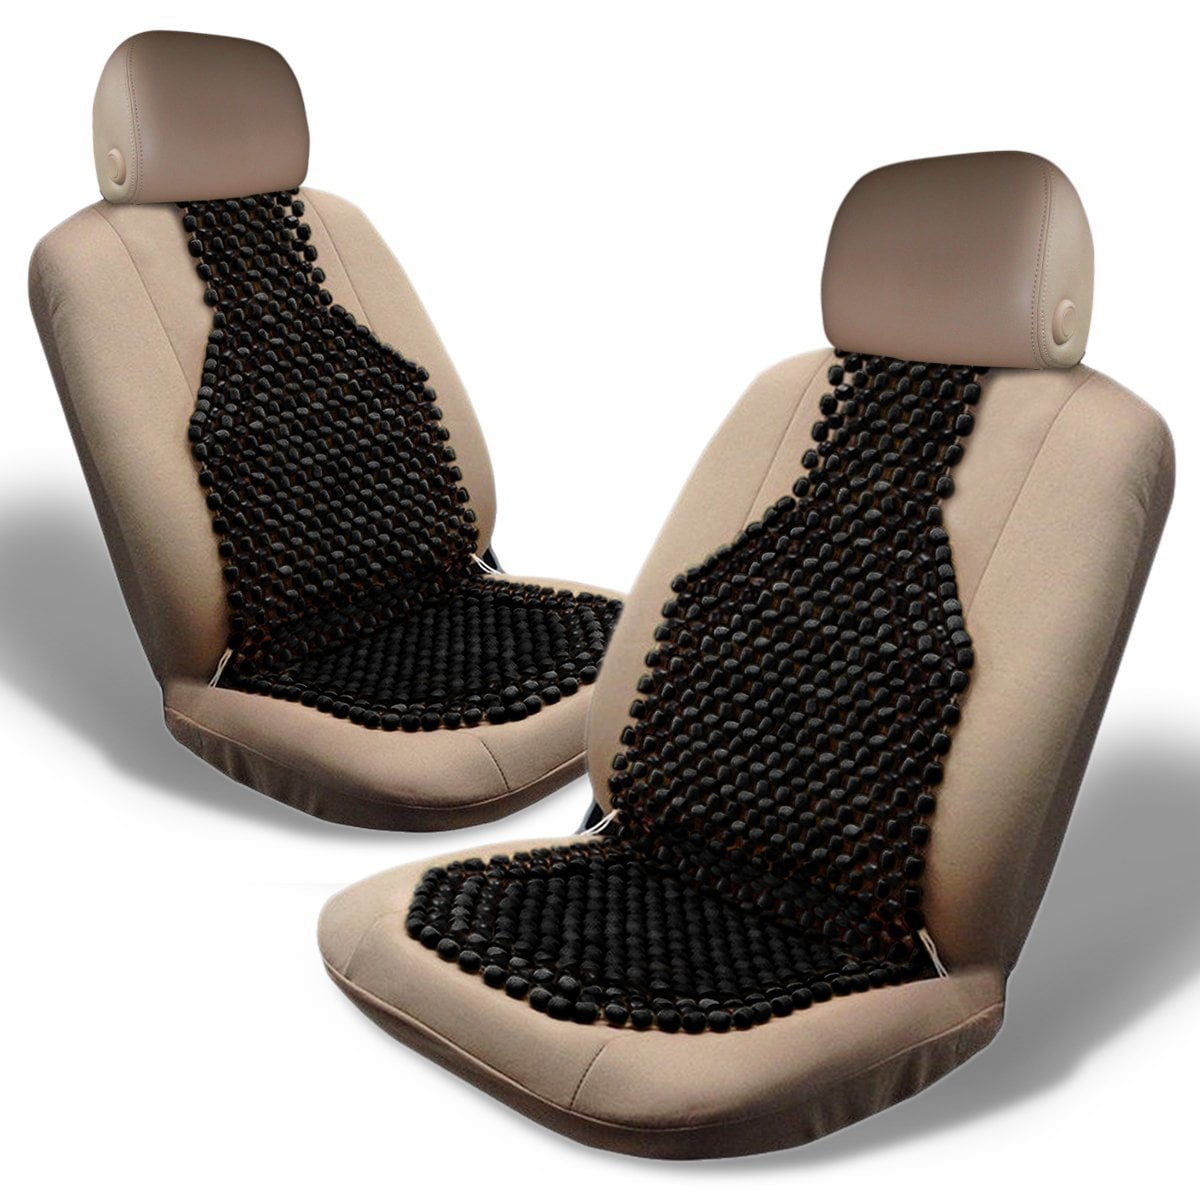 Bandwagon Automotive Seat Riser Cushion Helps Sight Line While Driving 